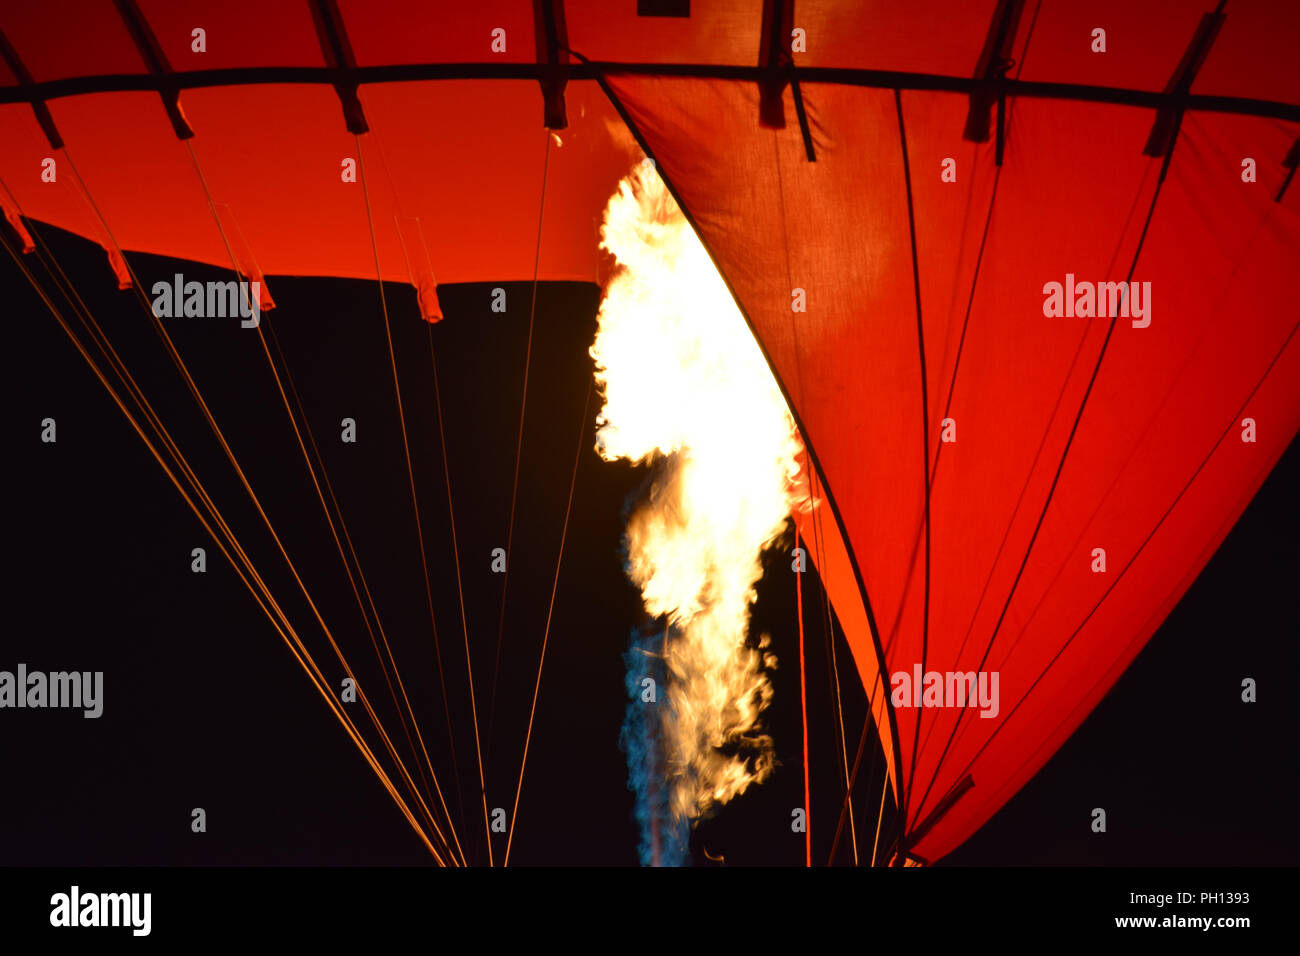 Close-up of a part of red hot air balloon burner flame glowing at night, burner with a extreme hot flame light up the inside of a red hot air balloon Stock Photo